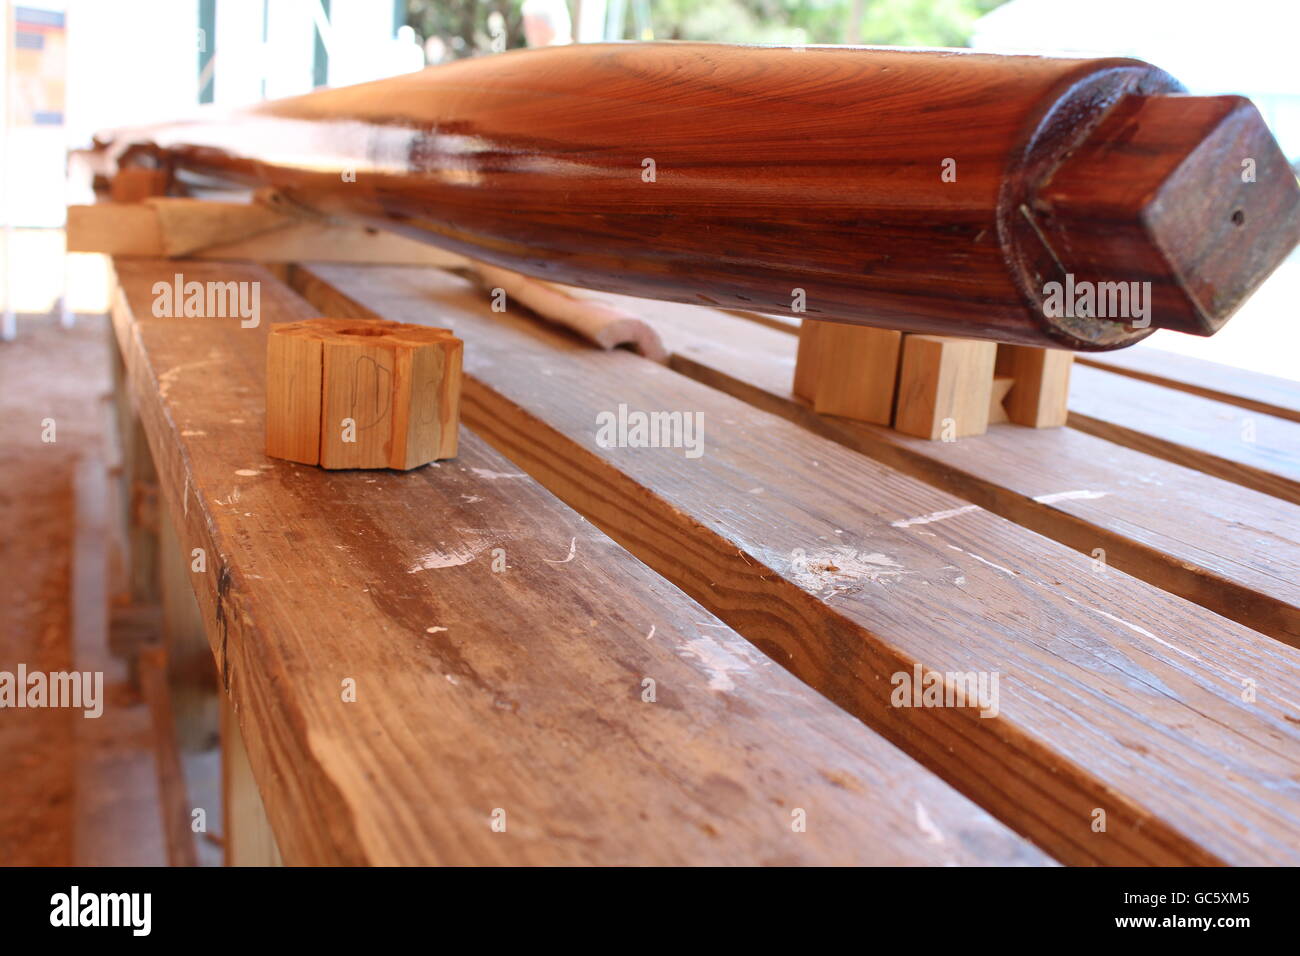 Wooden Mast Crafted in Alaska Stock Photo